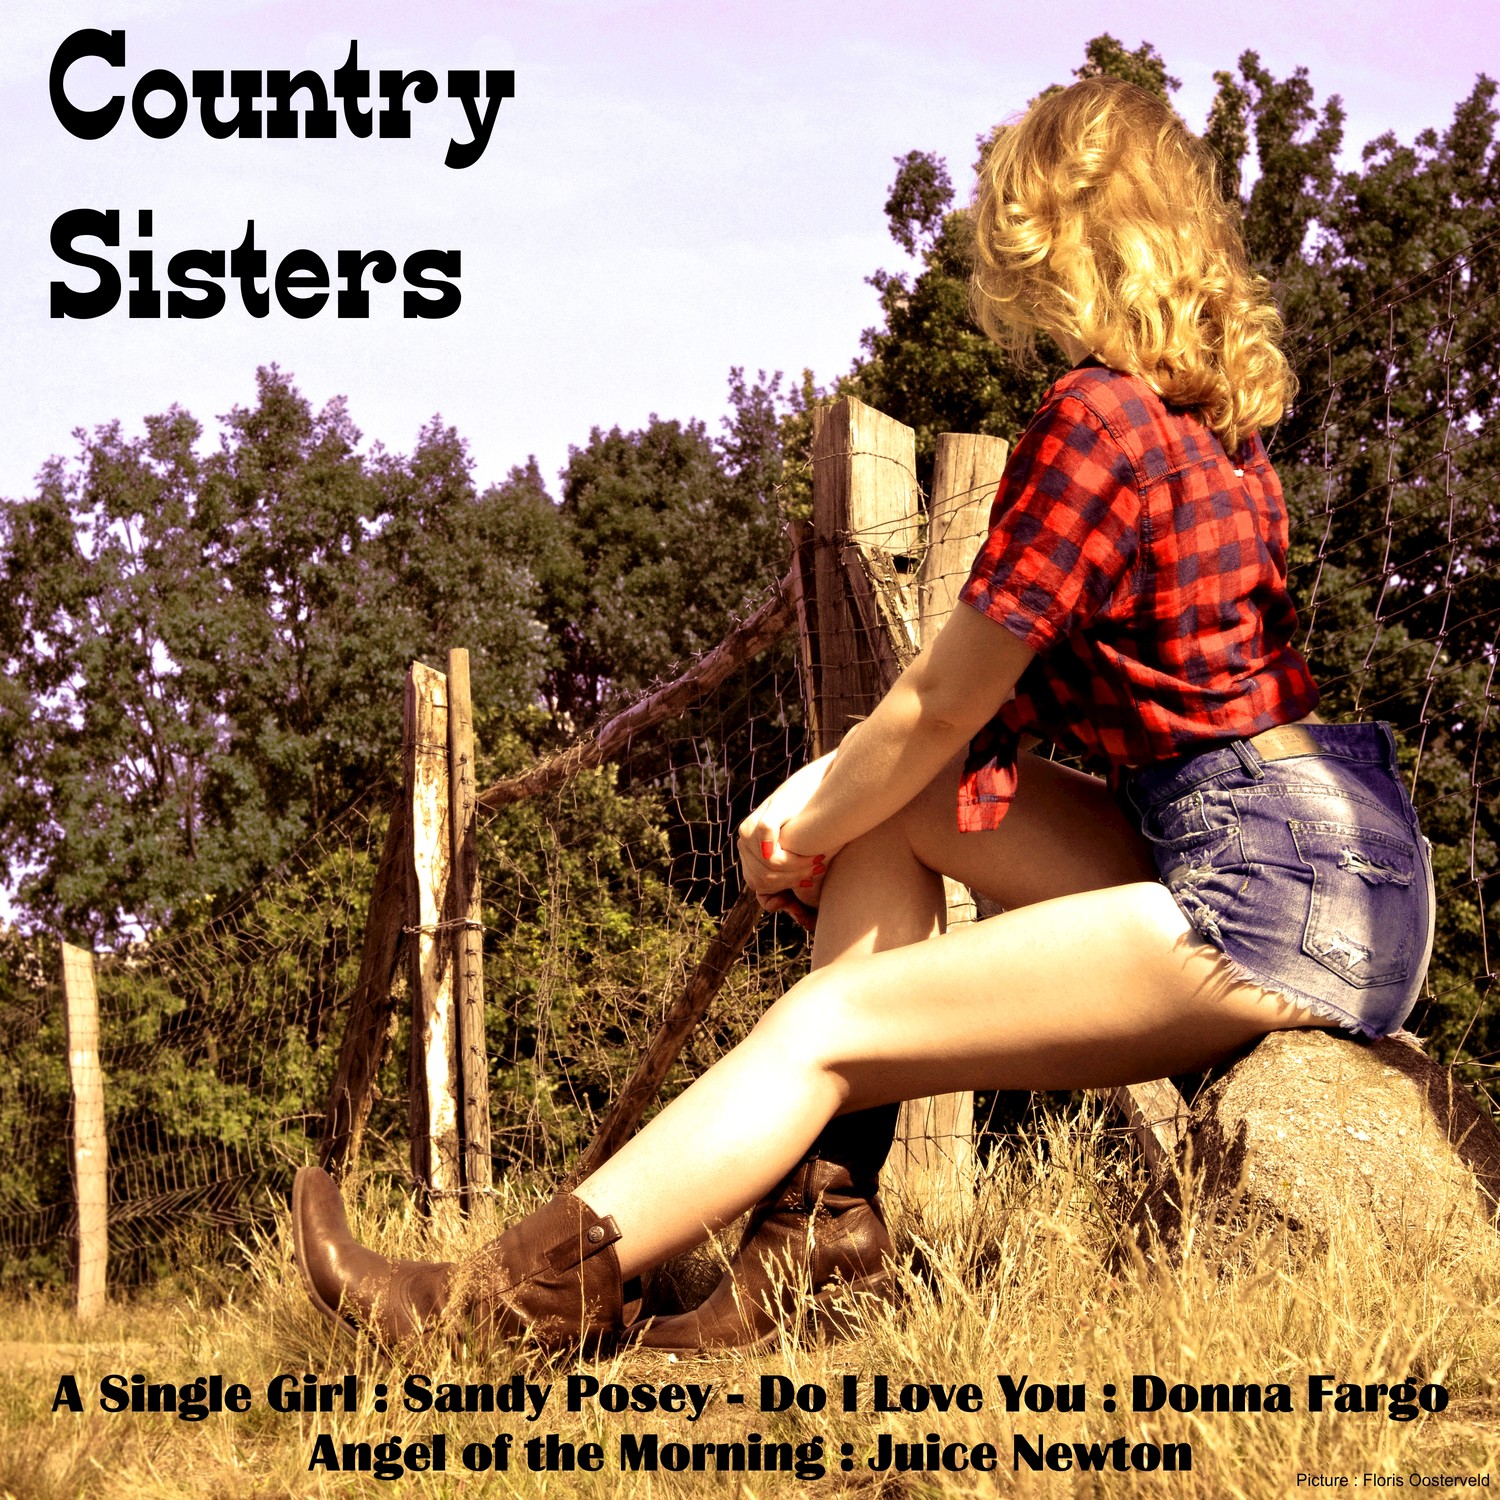 Country Sisters